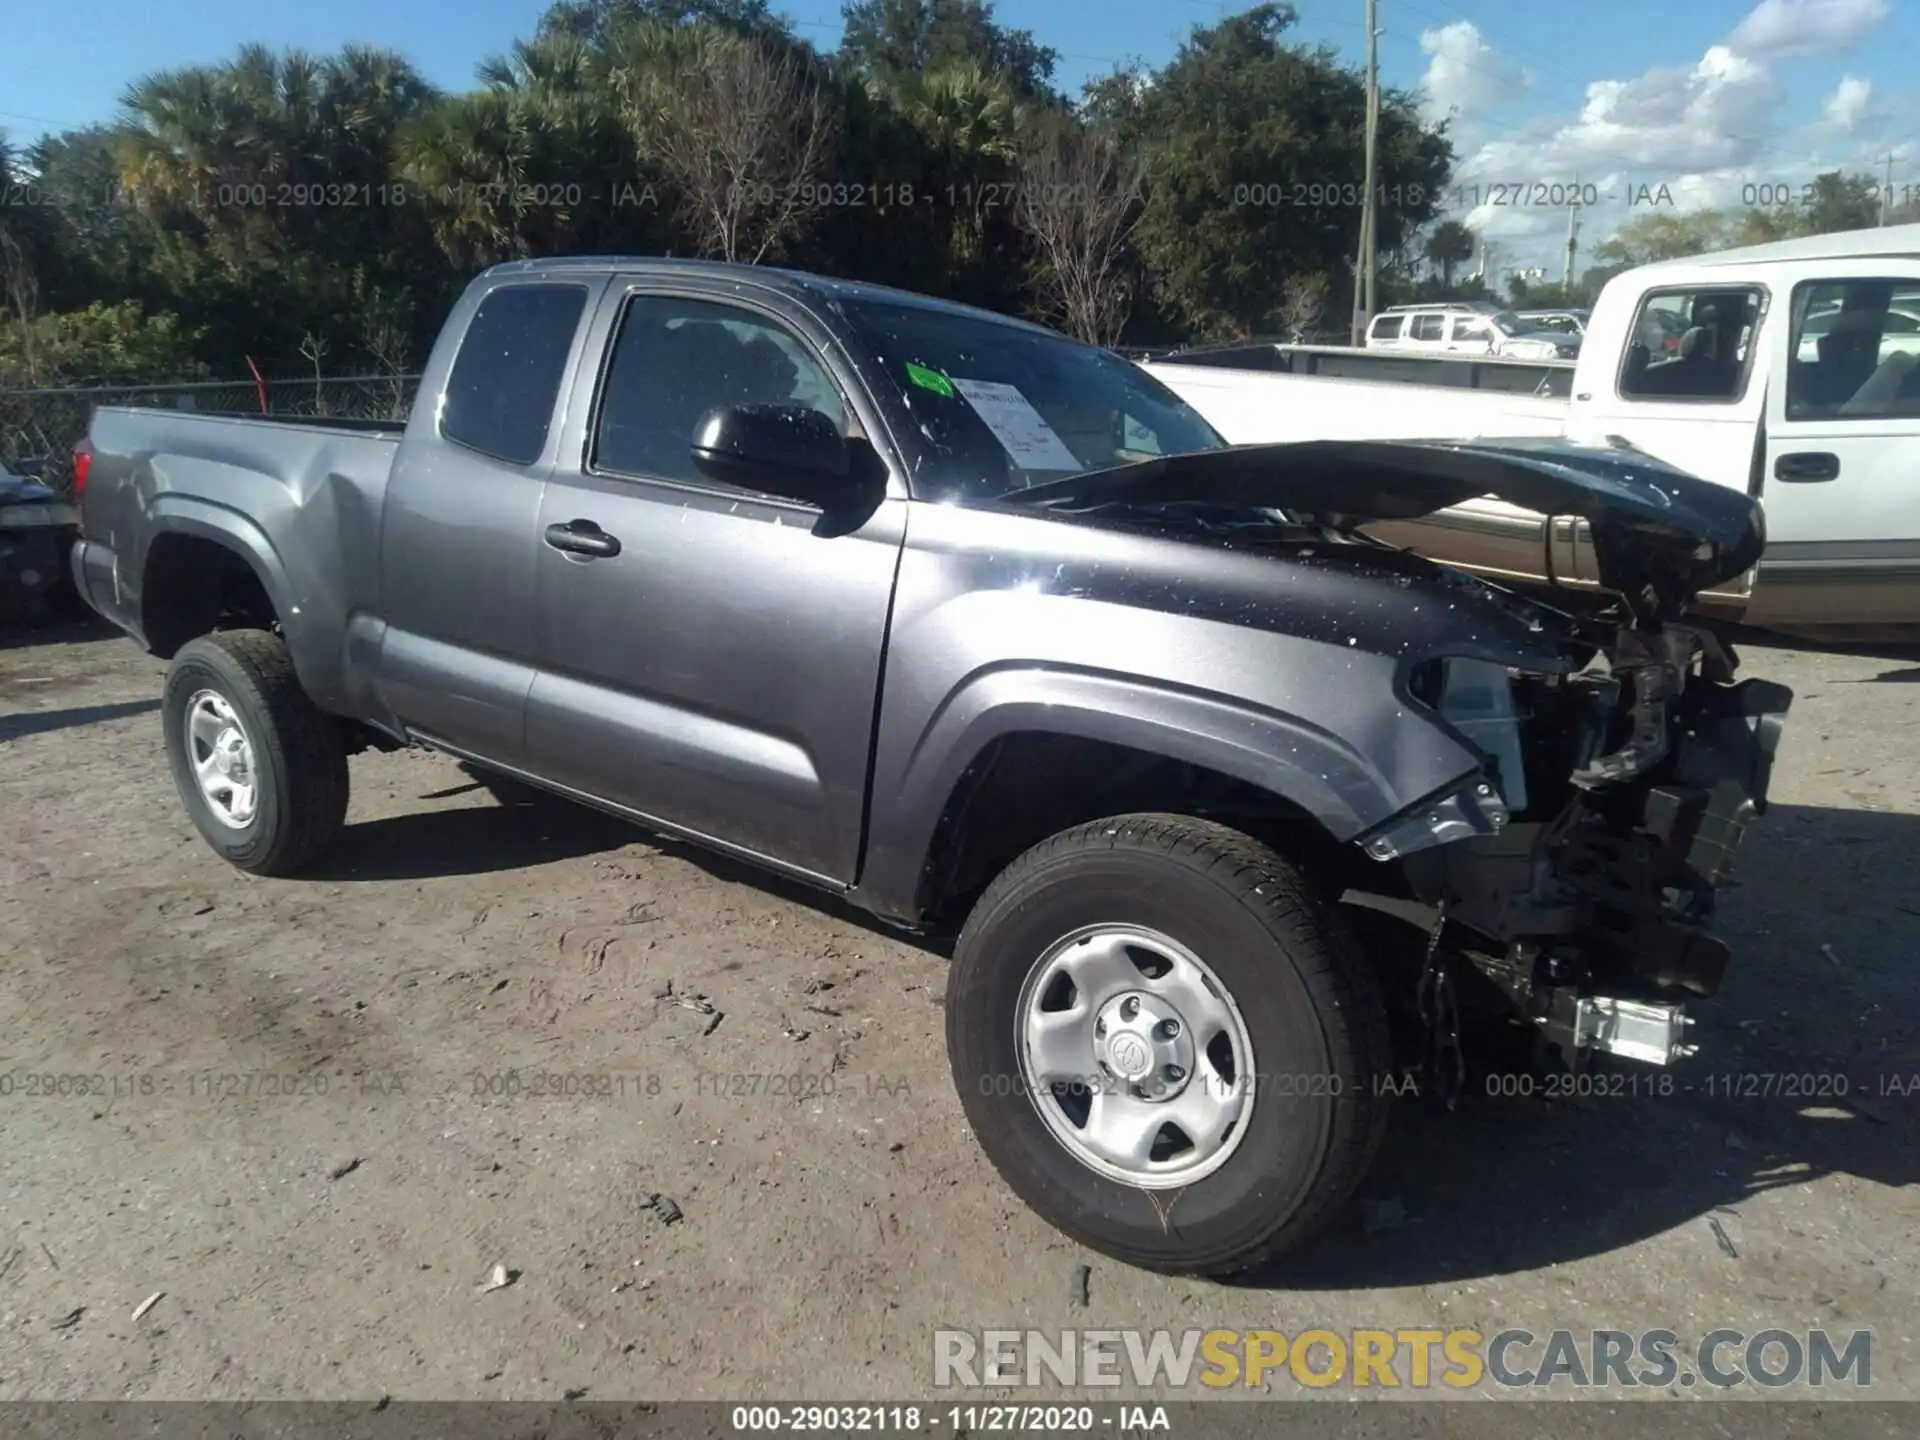 1 Photograph of a damaged car 3TYRX5GN8LT002425 TOYOTA TACOMA 2WD 2020